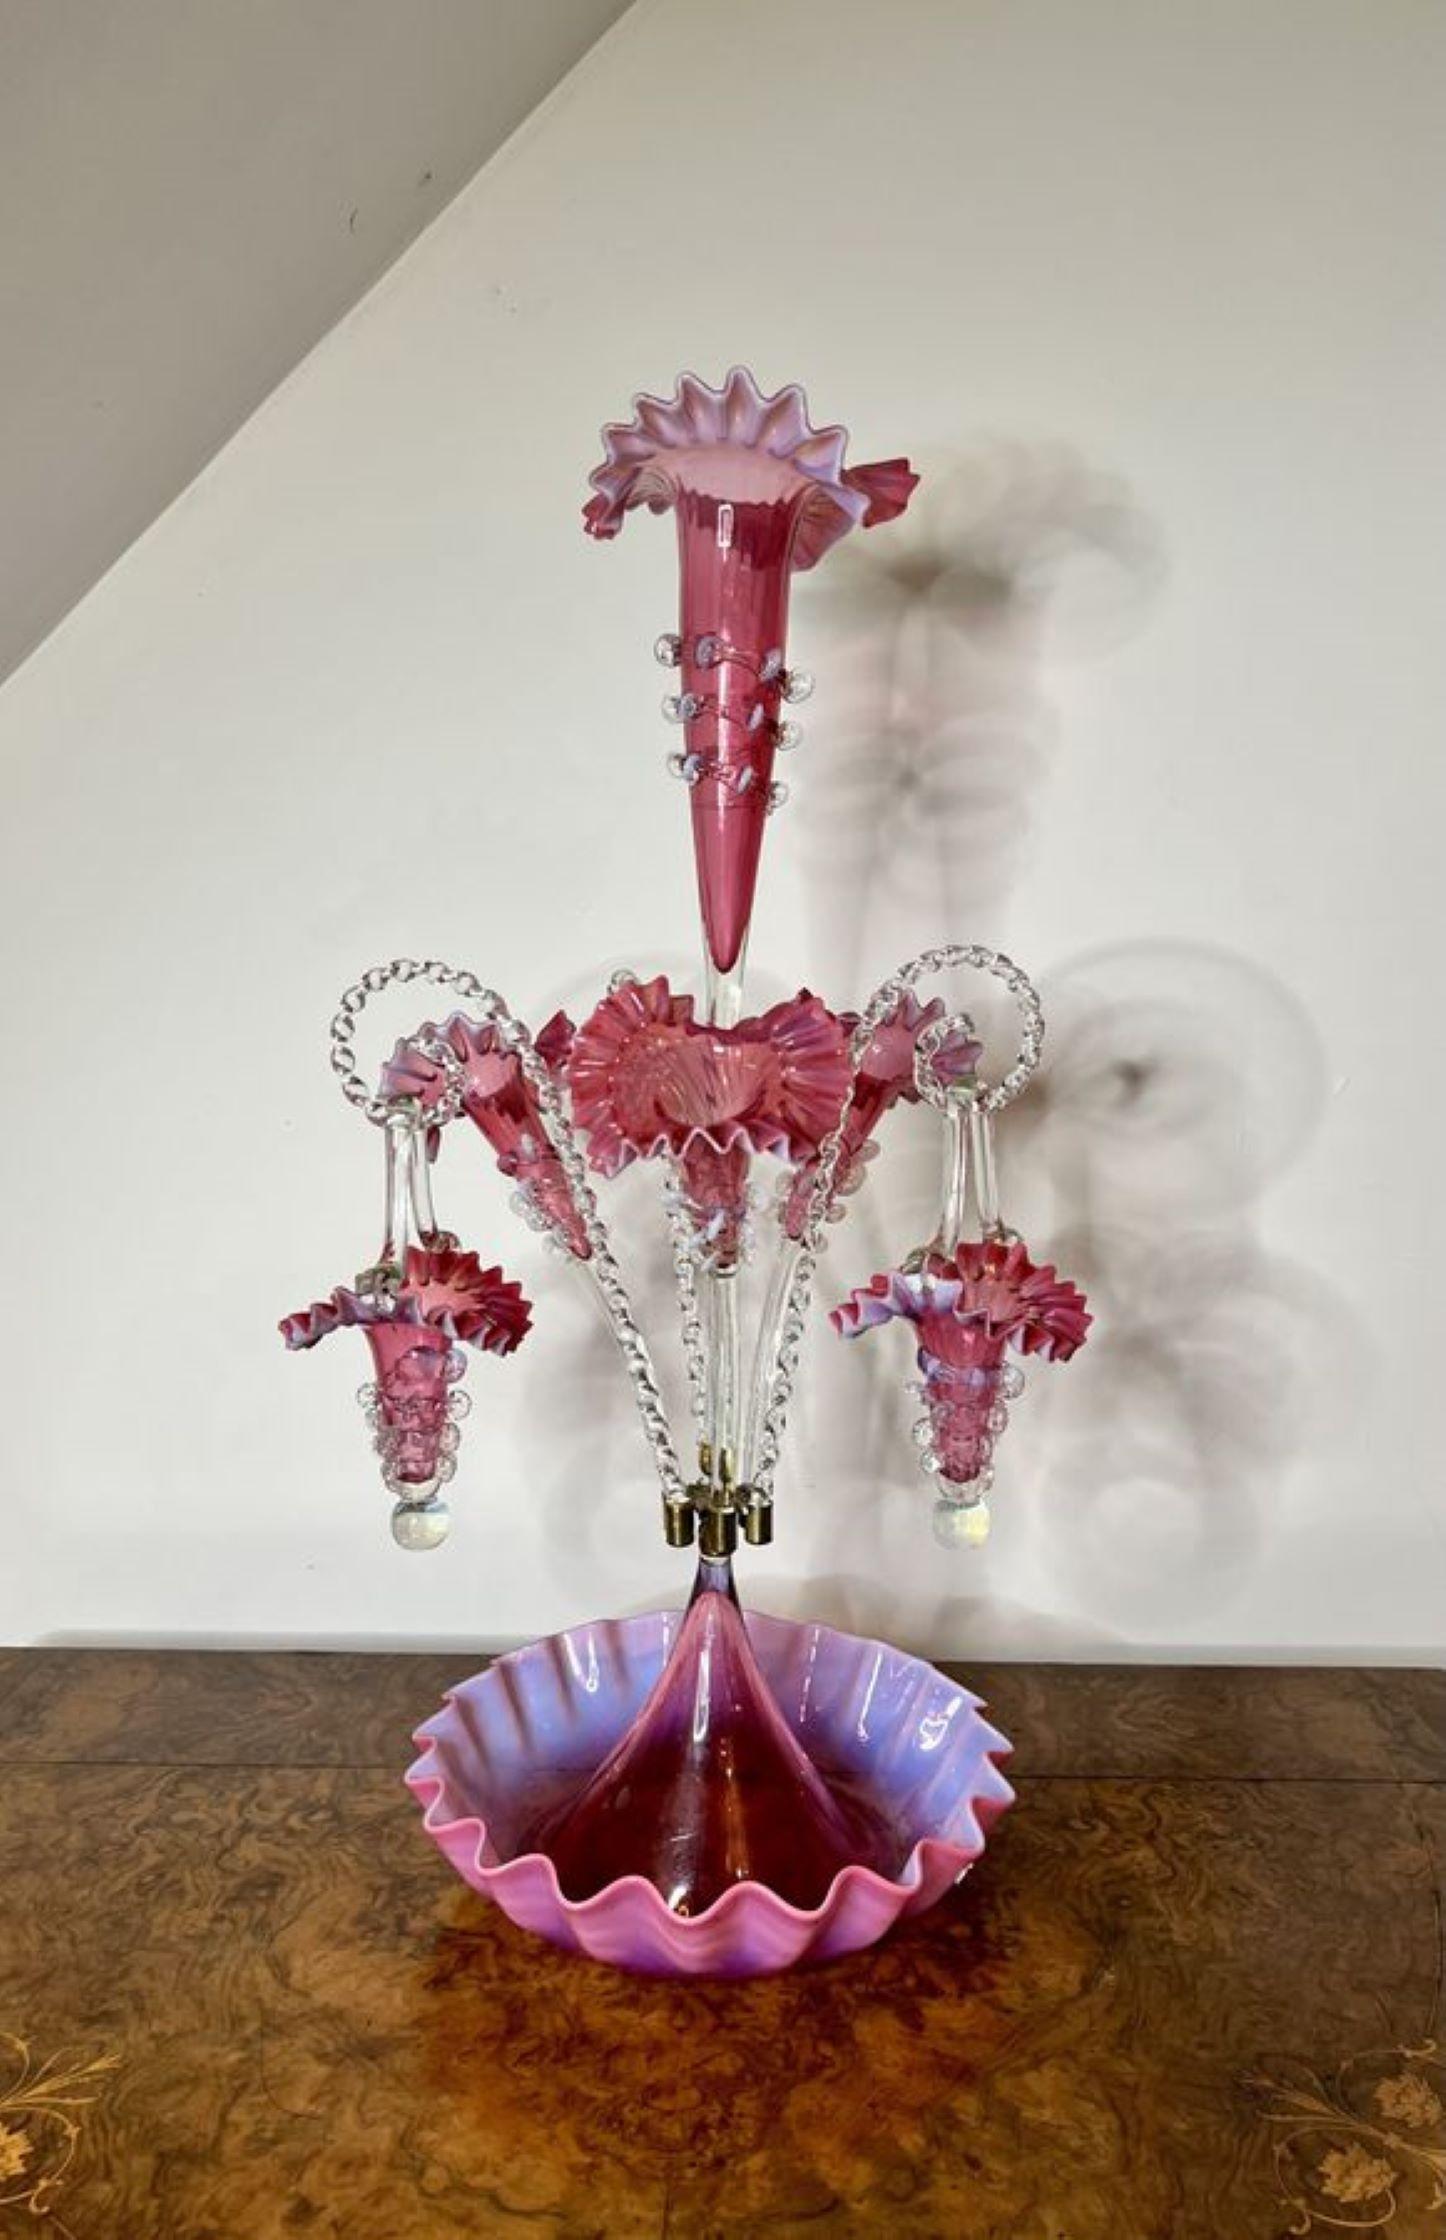 Glass Outstanding quality large antique Victorian cranberry glass epergne